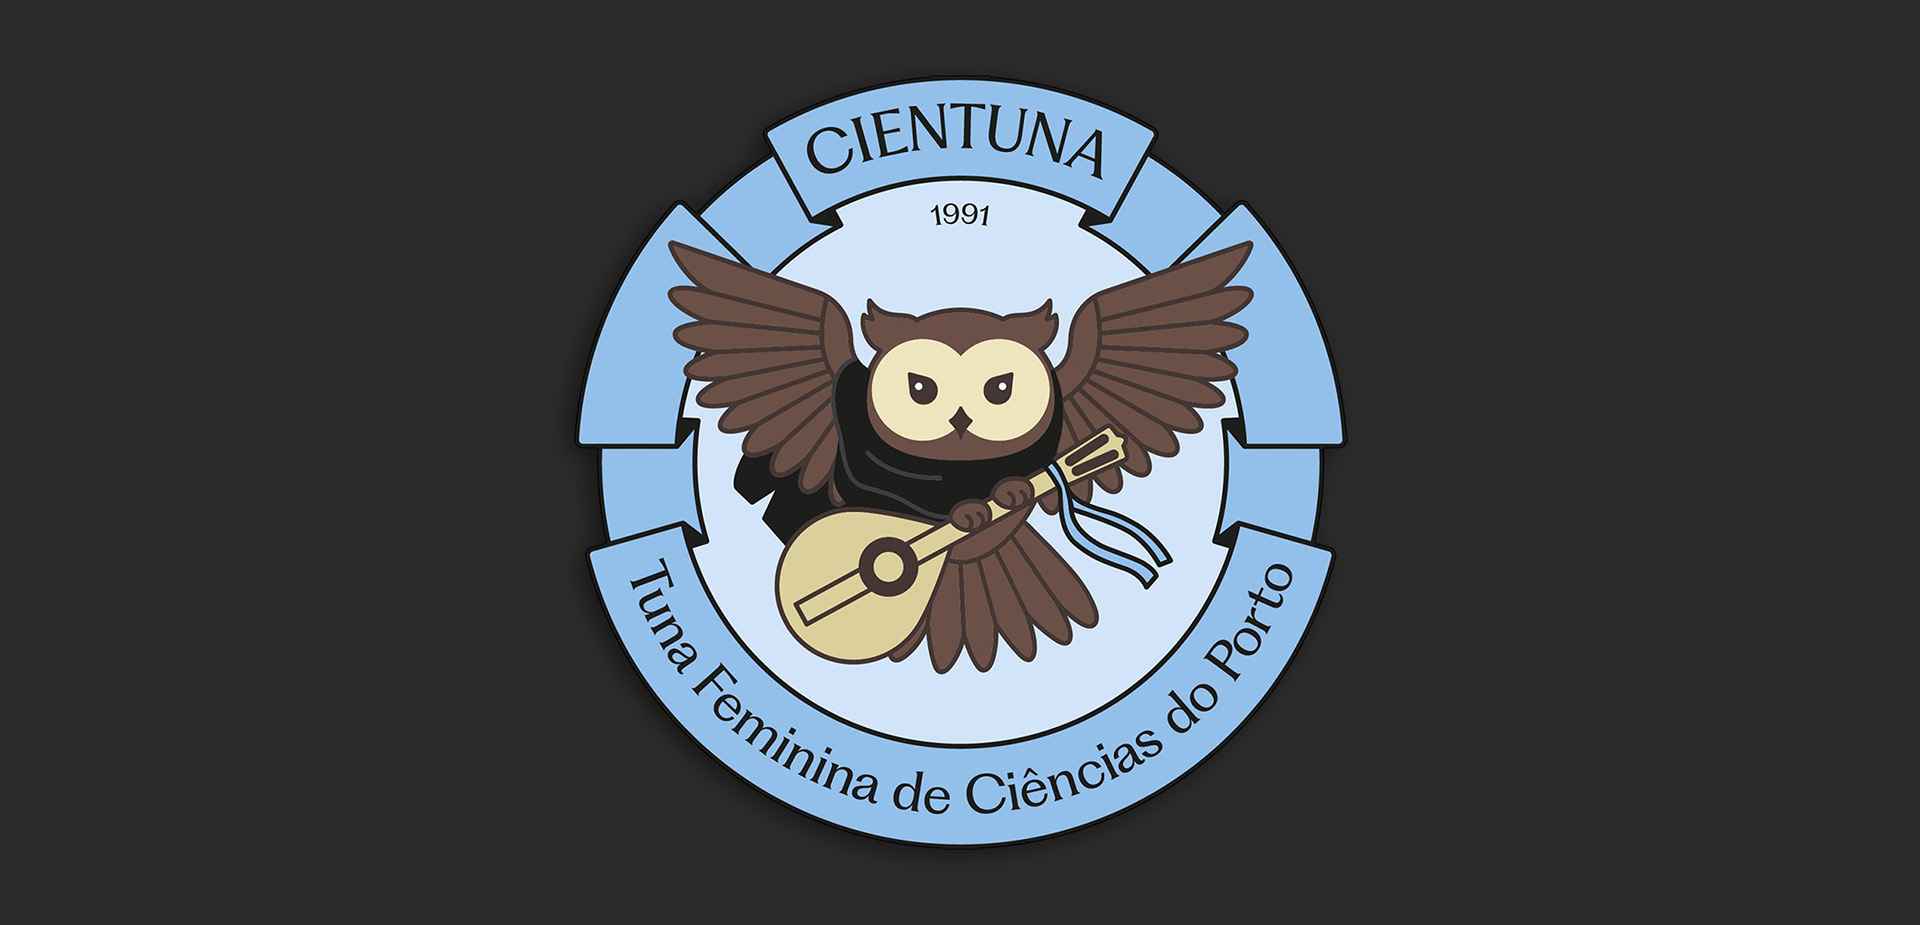 Logo of Cientuna - Women's Academic Tuna of the Faculty of Sciences of the University of Porto